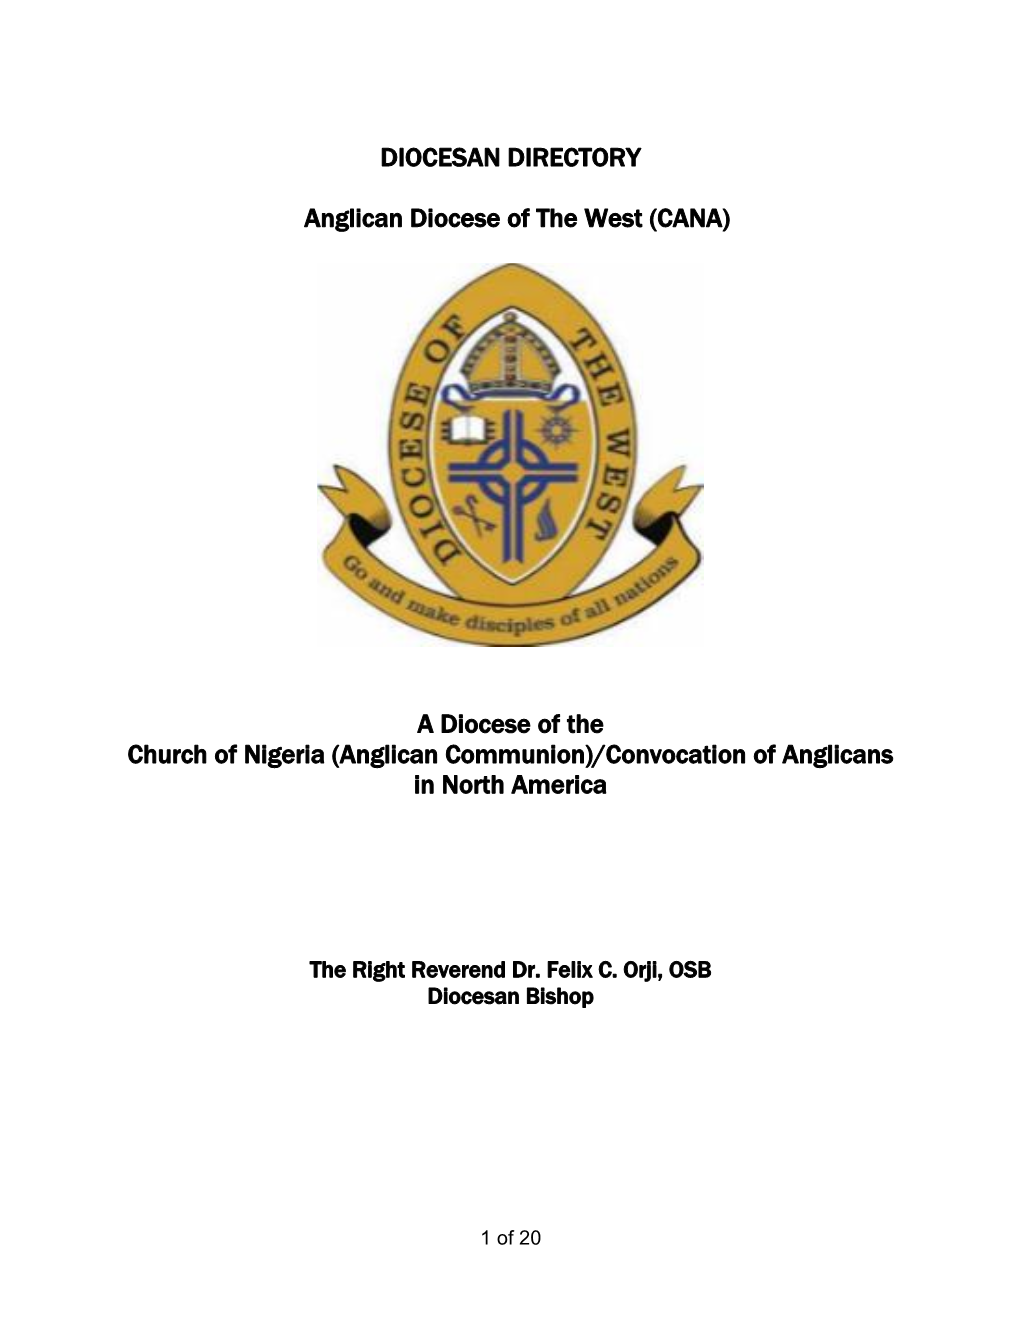 DIOCESAN DIRECTORY Anglican Diocese of the West (CANA)